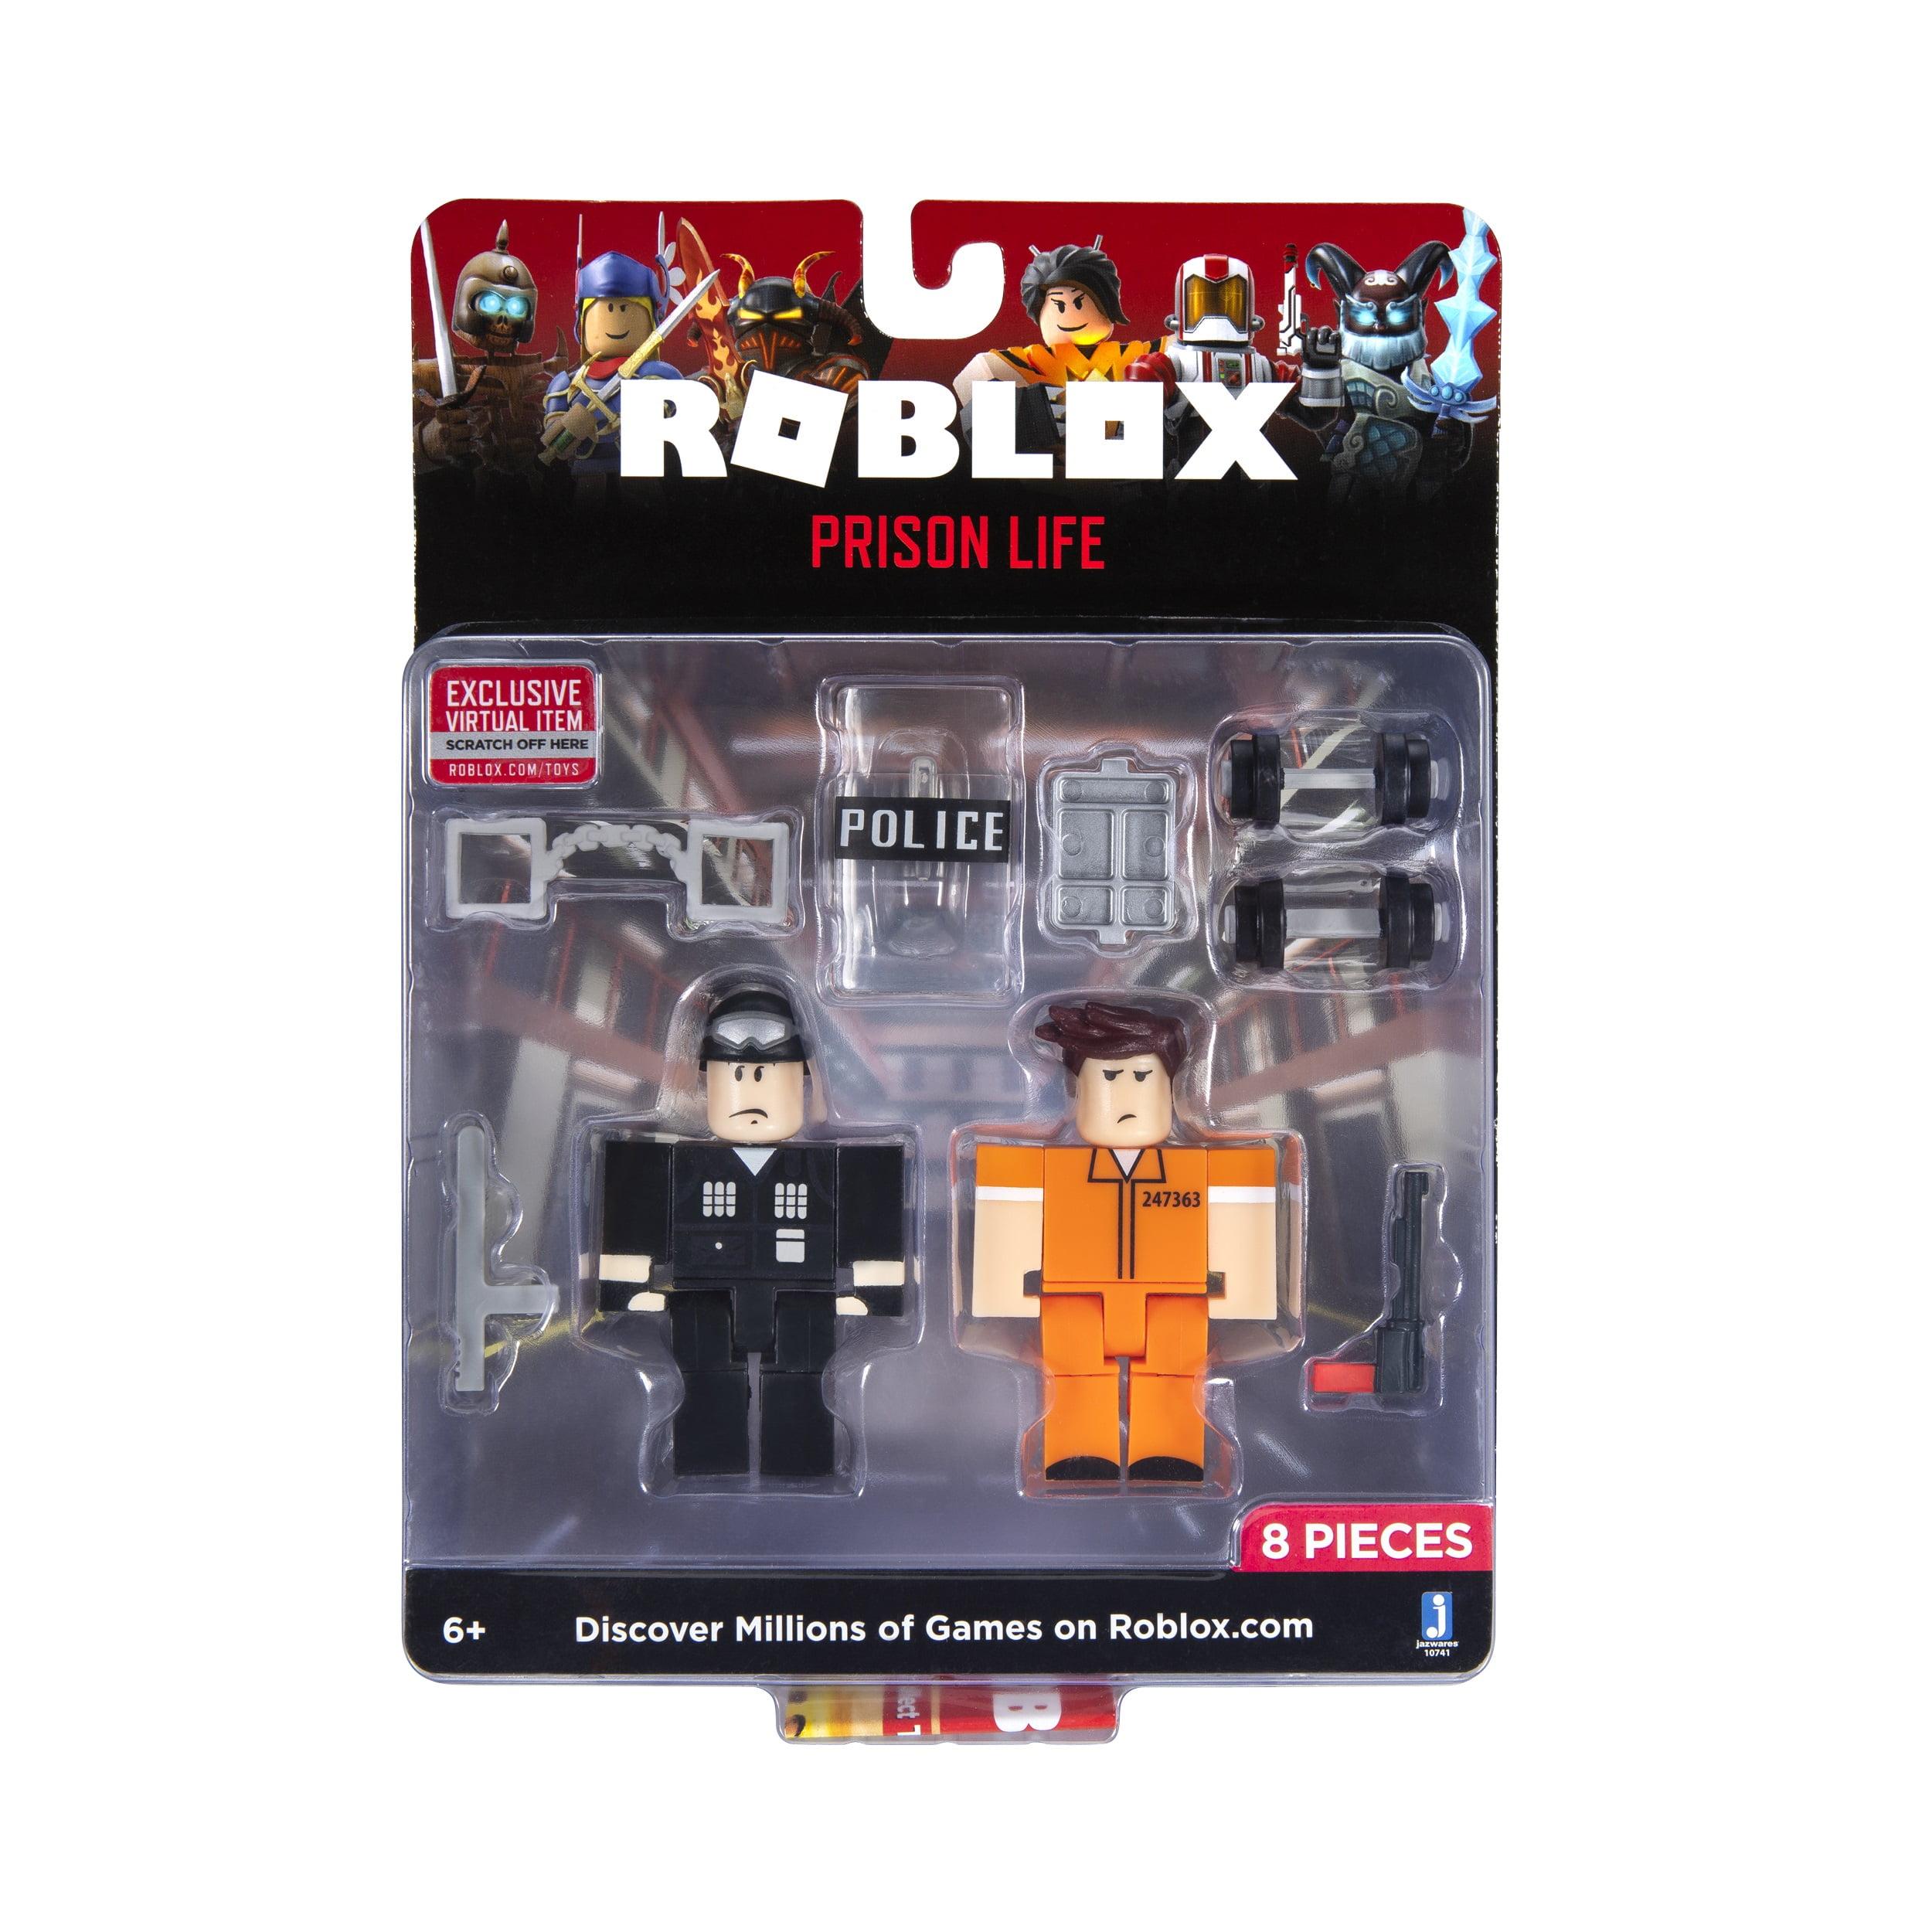 Roblox Action Collection Prison Life Game Pack Includes Exclusive Virtual Item Walmart Com Walmart Com - game guide 2 roblox jailbreak cop guide game reviews